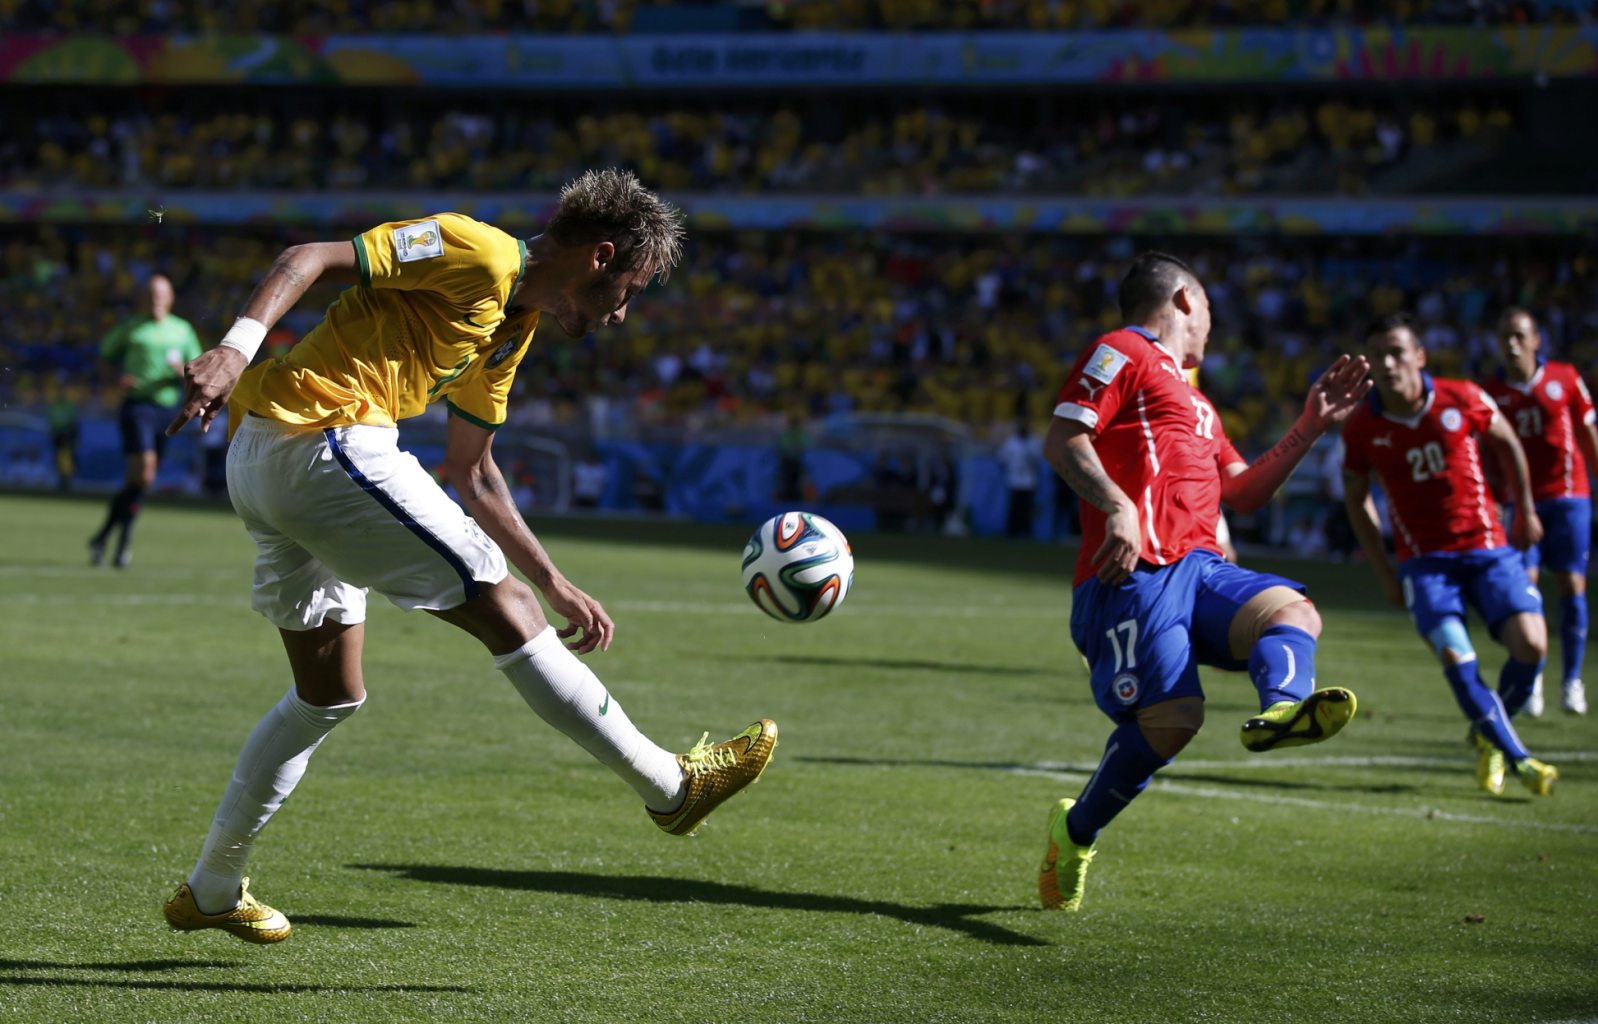 Neymar crossing the ball, in Brazil vs Chile at the FIFA World Cup 2014